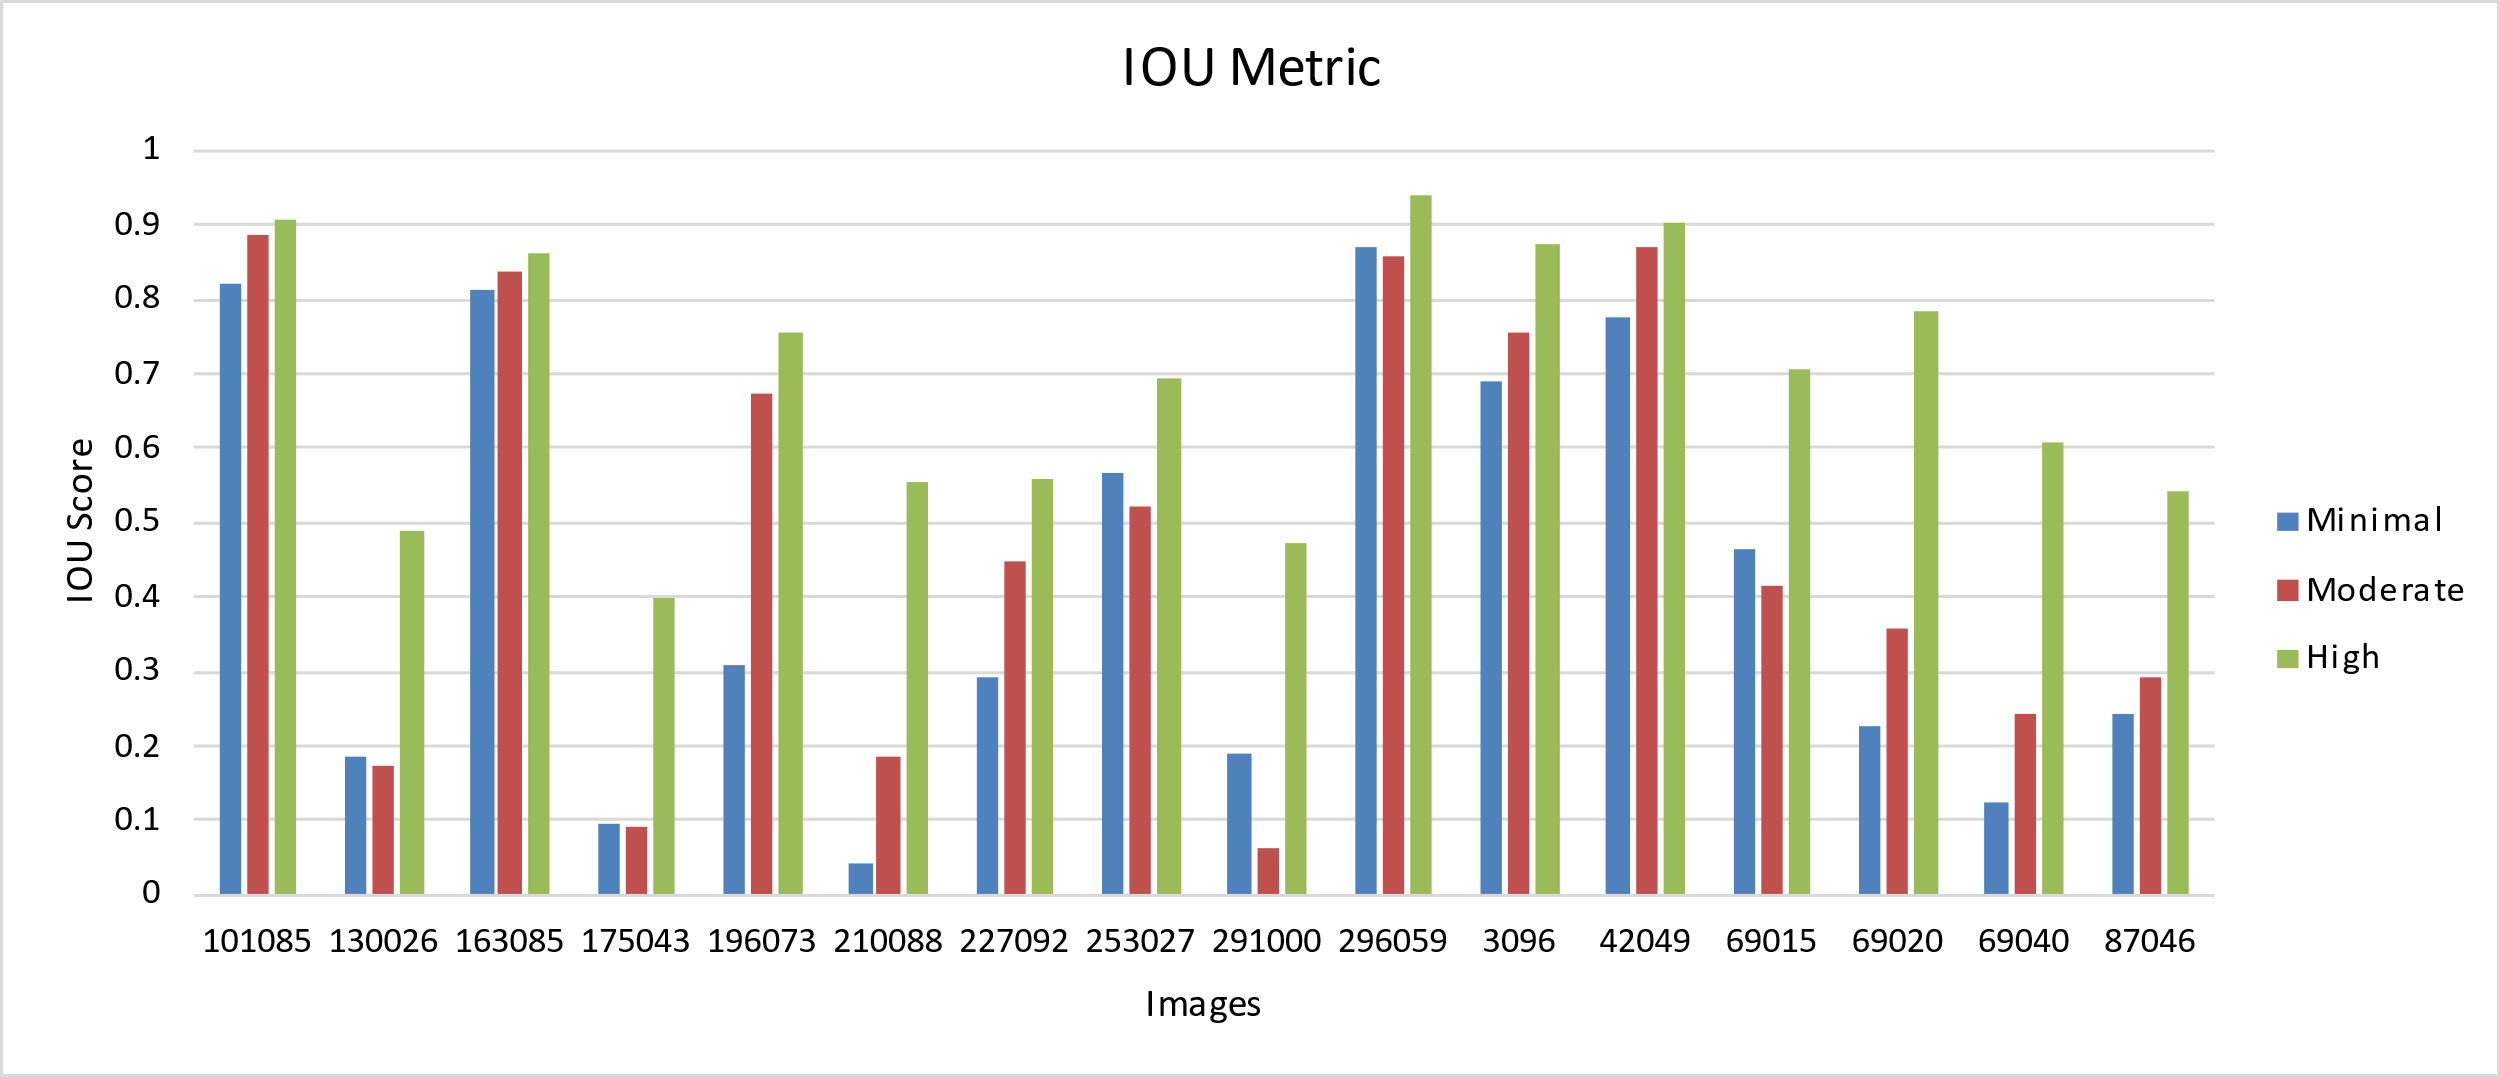 Figure 3: IoU Scores of the Max-flow Min-cut Graph Based Image Segmentation for various images from the Berkeley Image Segmentation dataset.